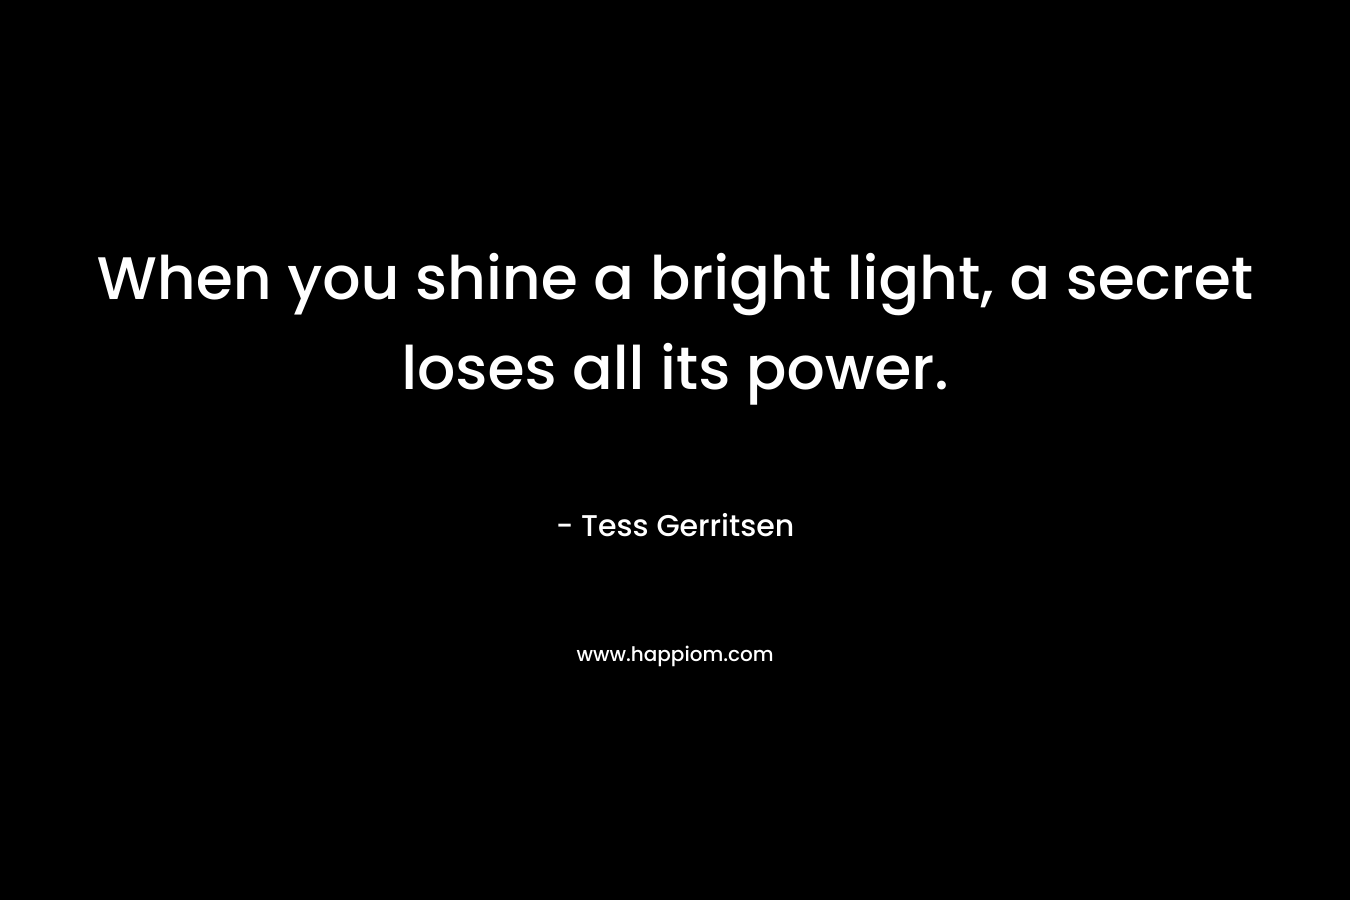 When you shine a bright light, a secret loses all its power. – Tess Gerritsen